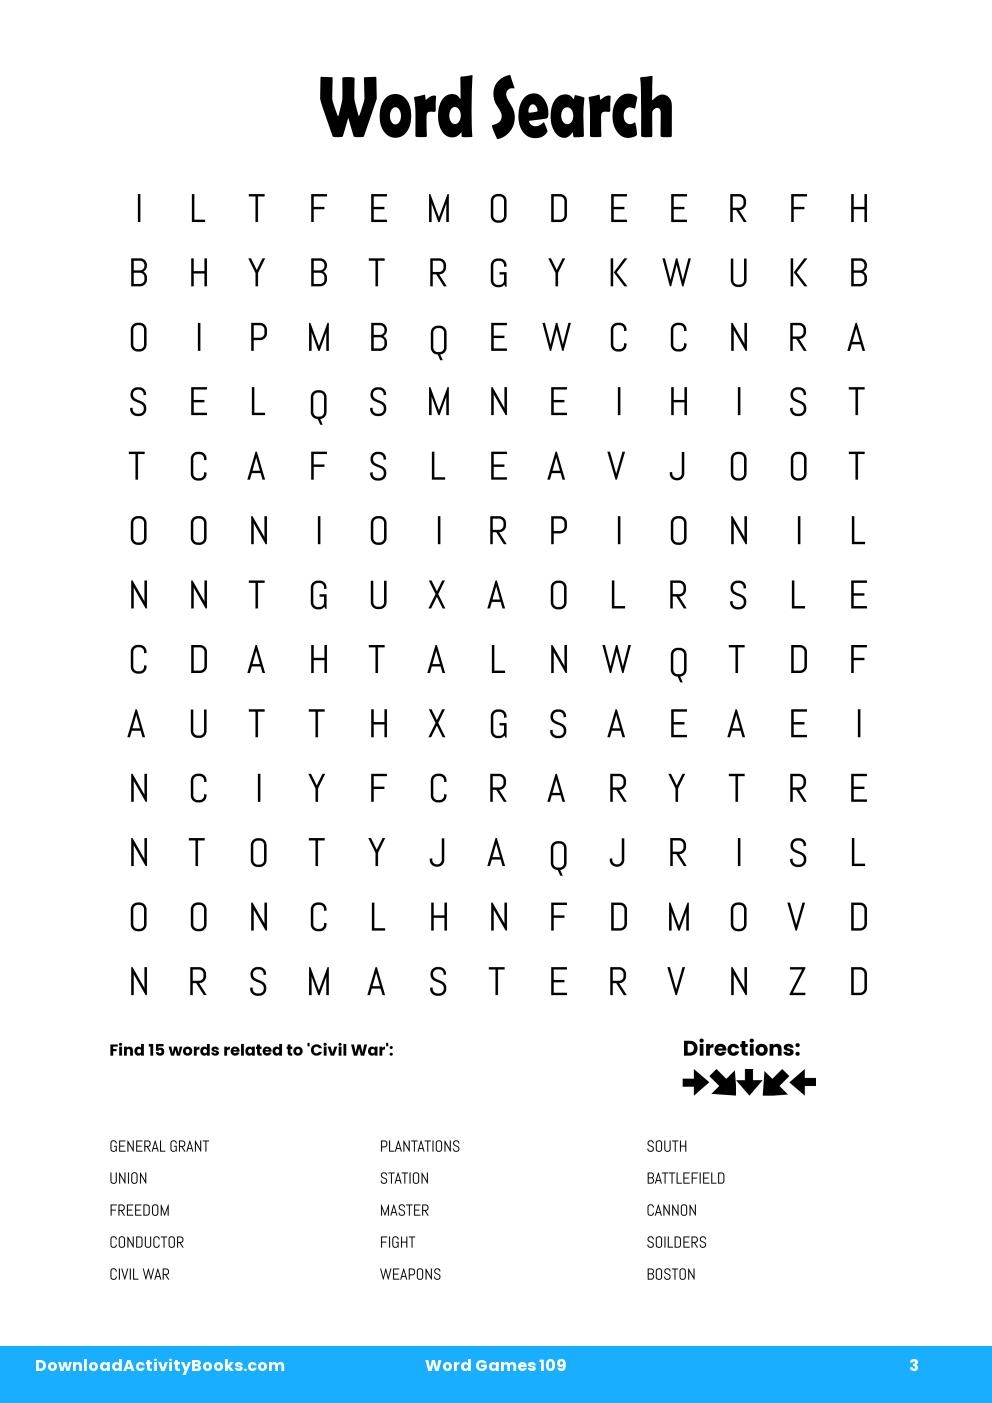 Word Search in Word Games 109